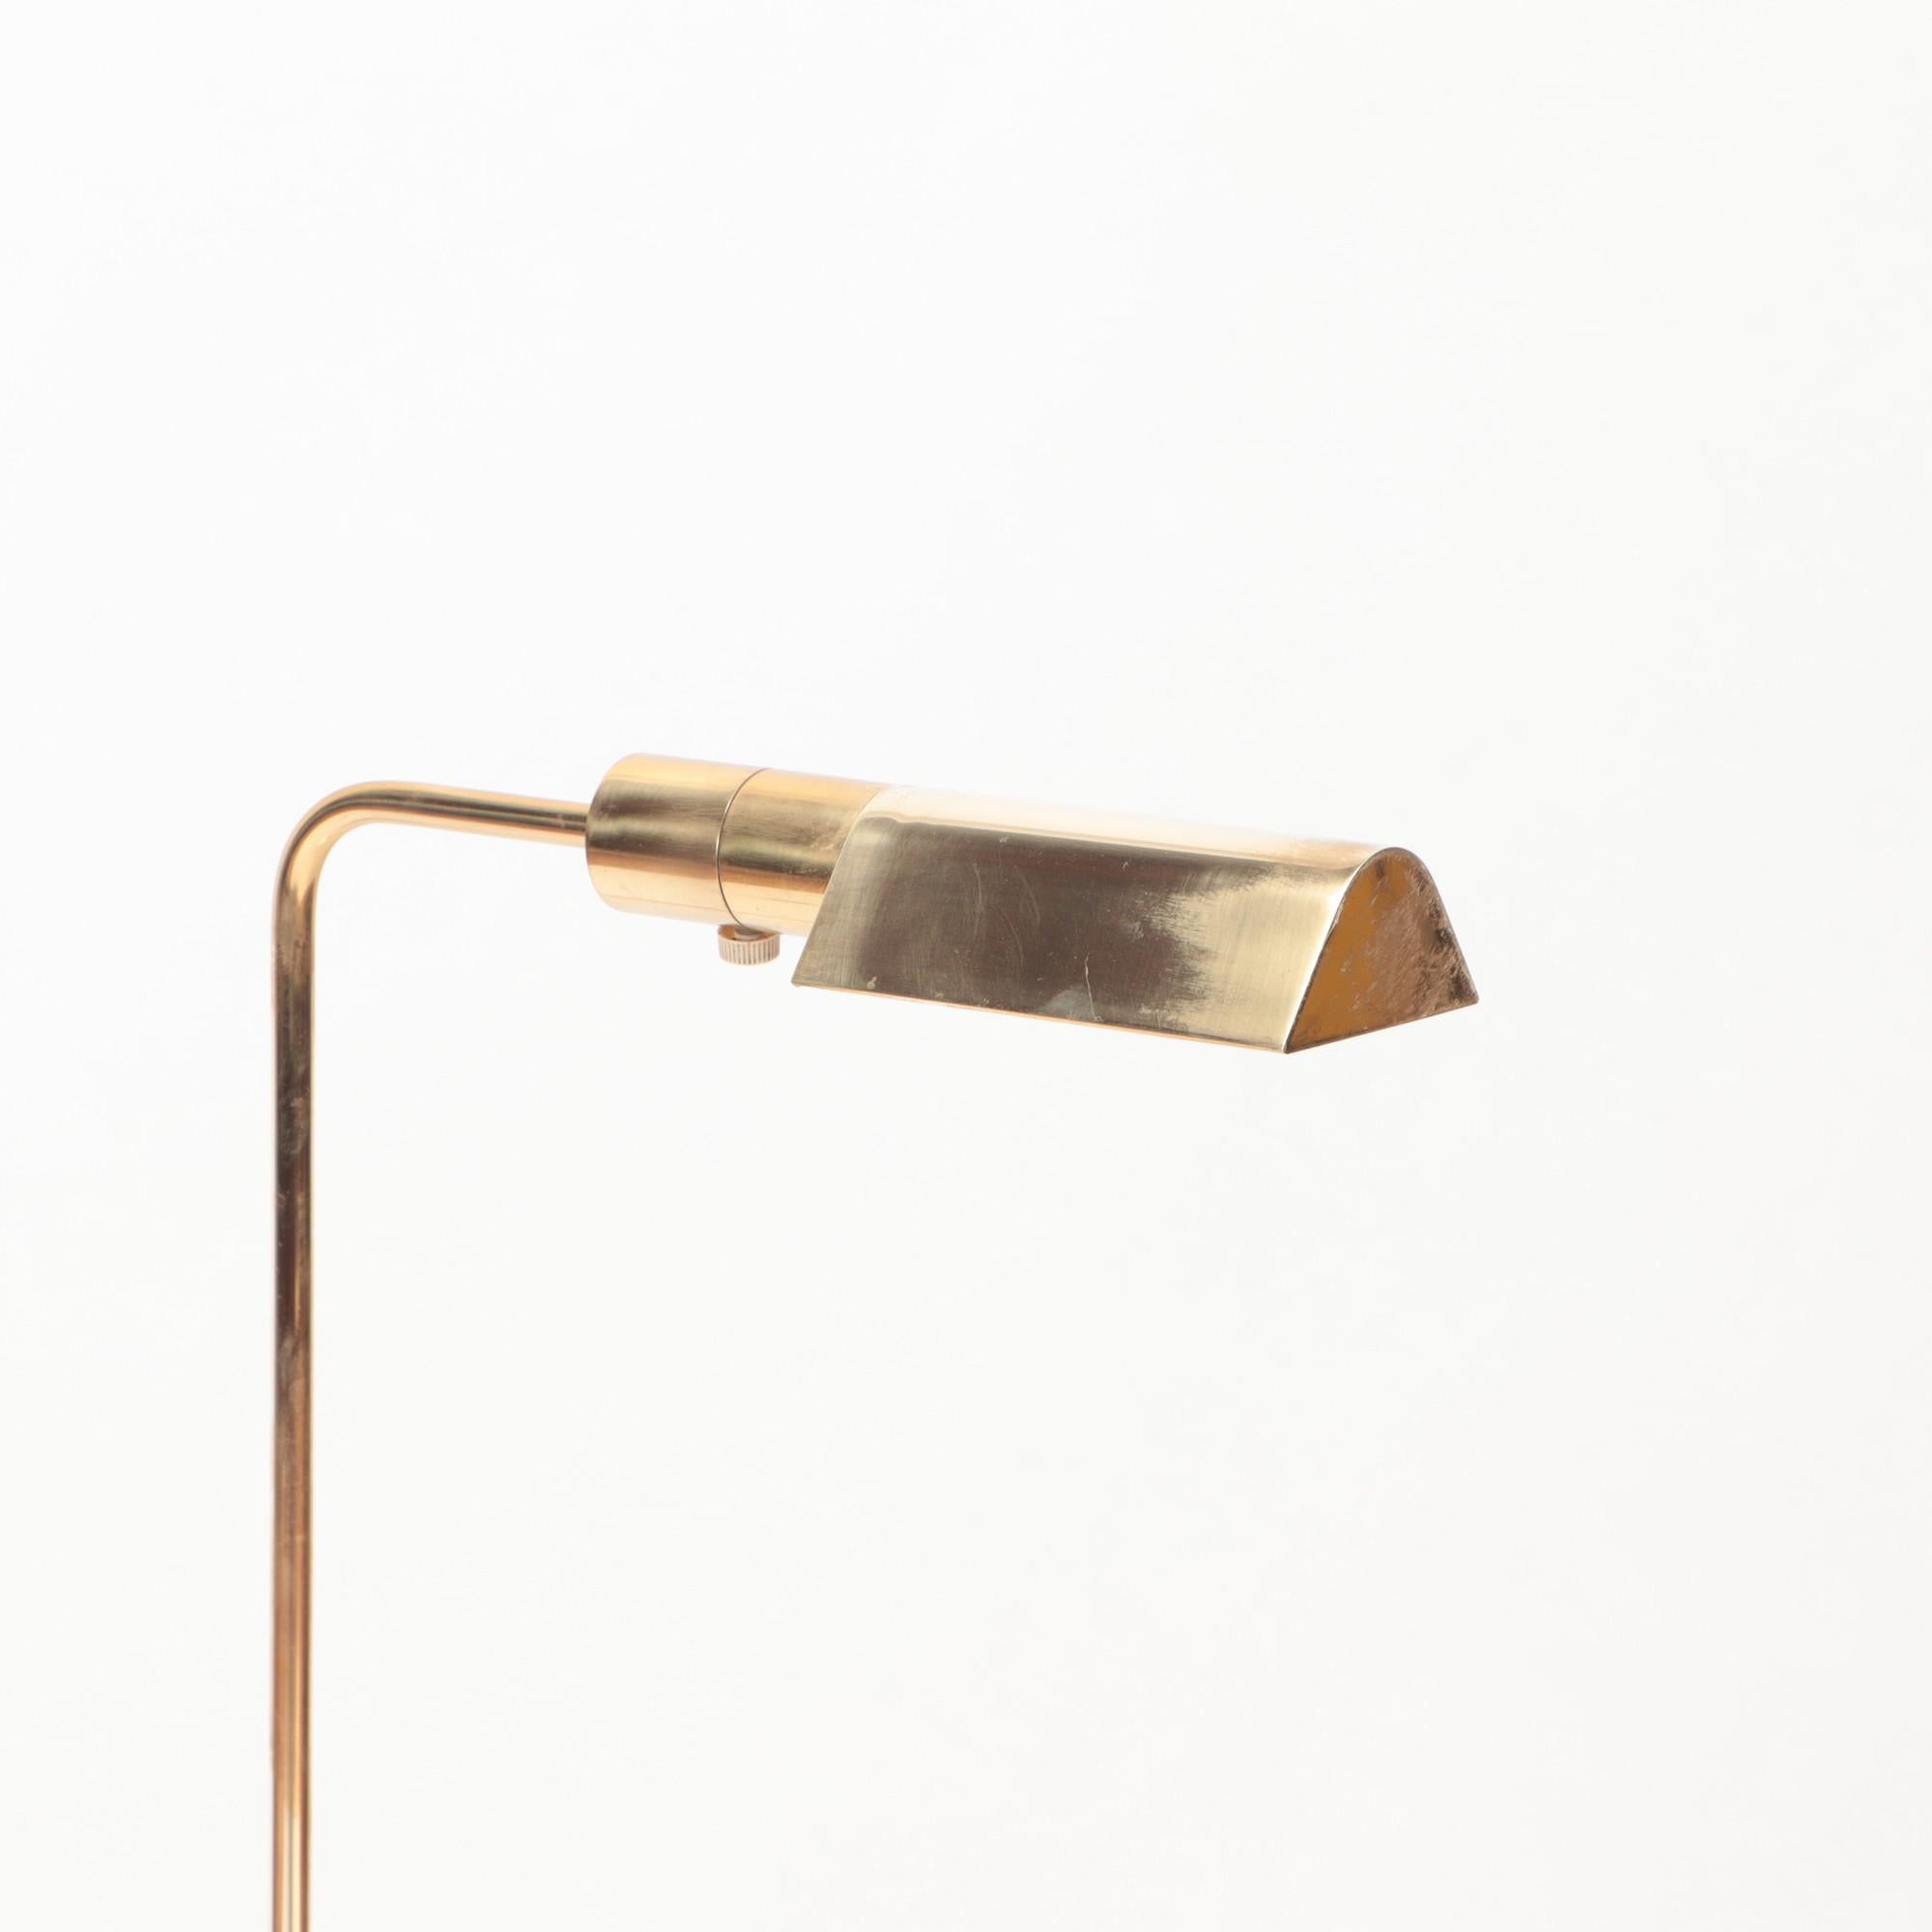 An unusual Brass and glass adjustable floor lamp. C 1970.